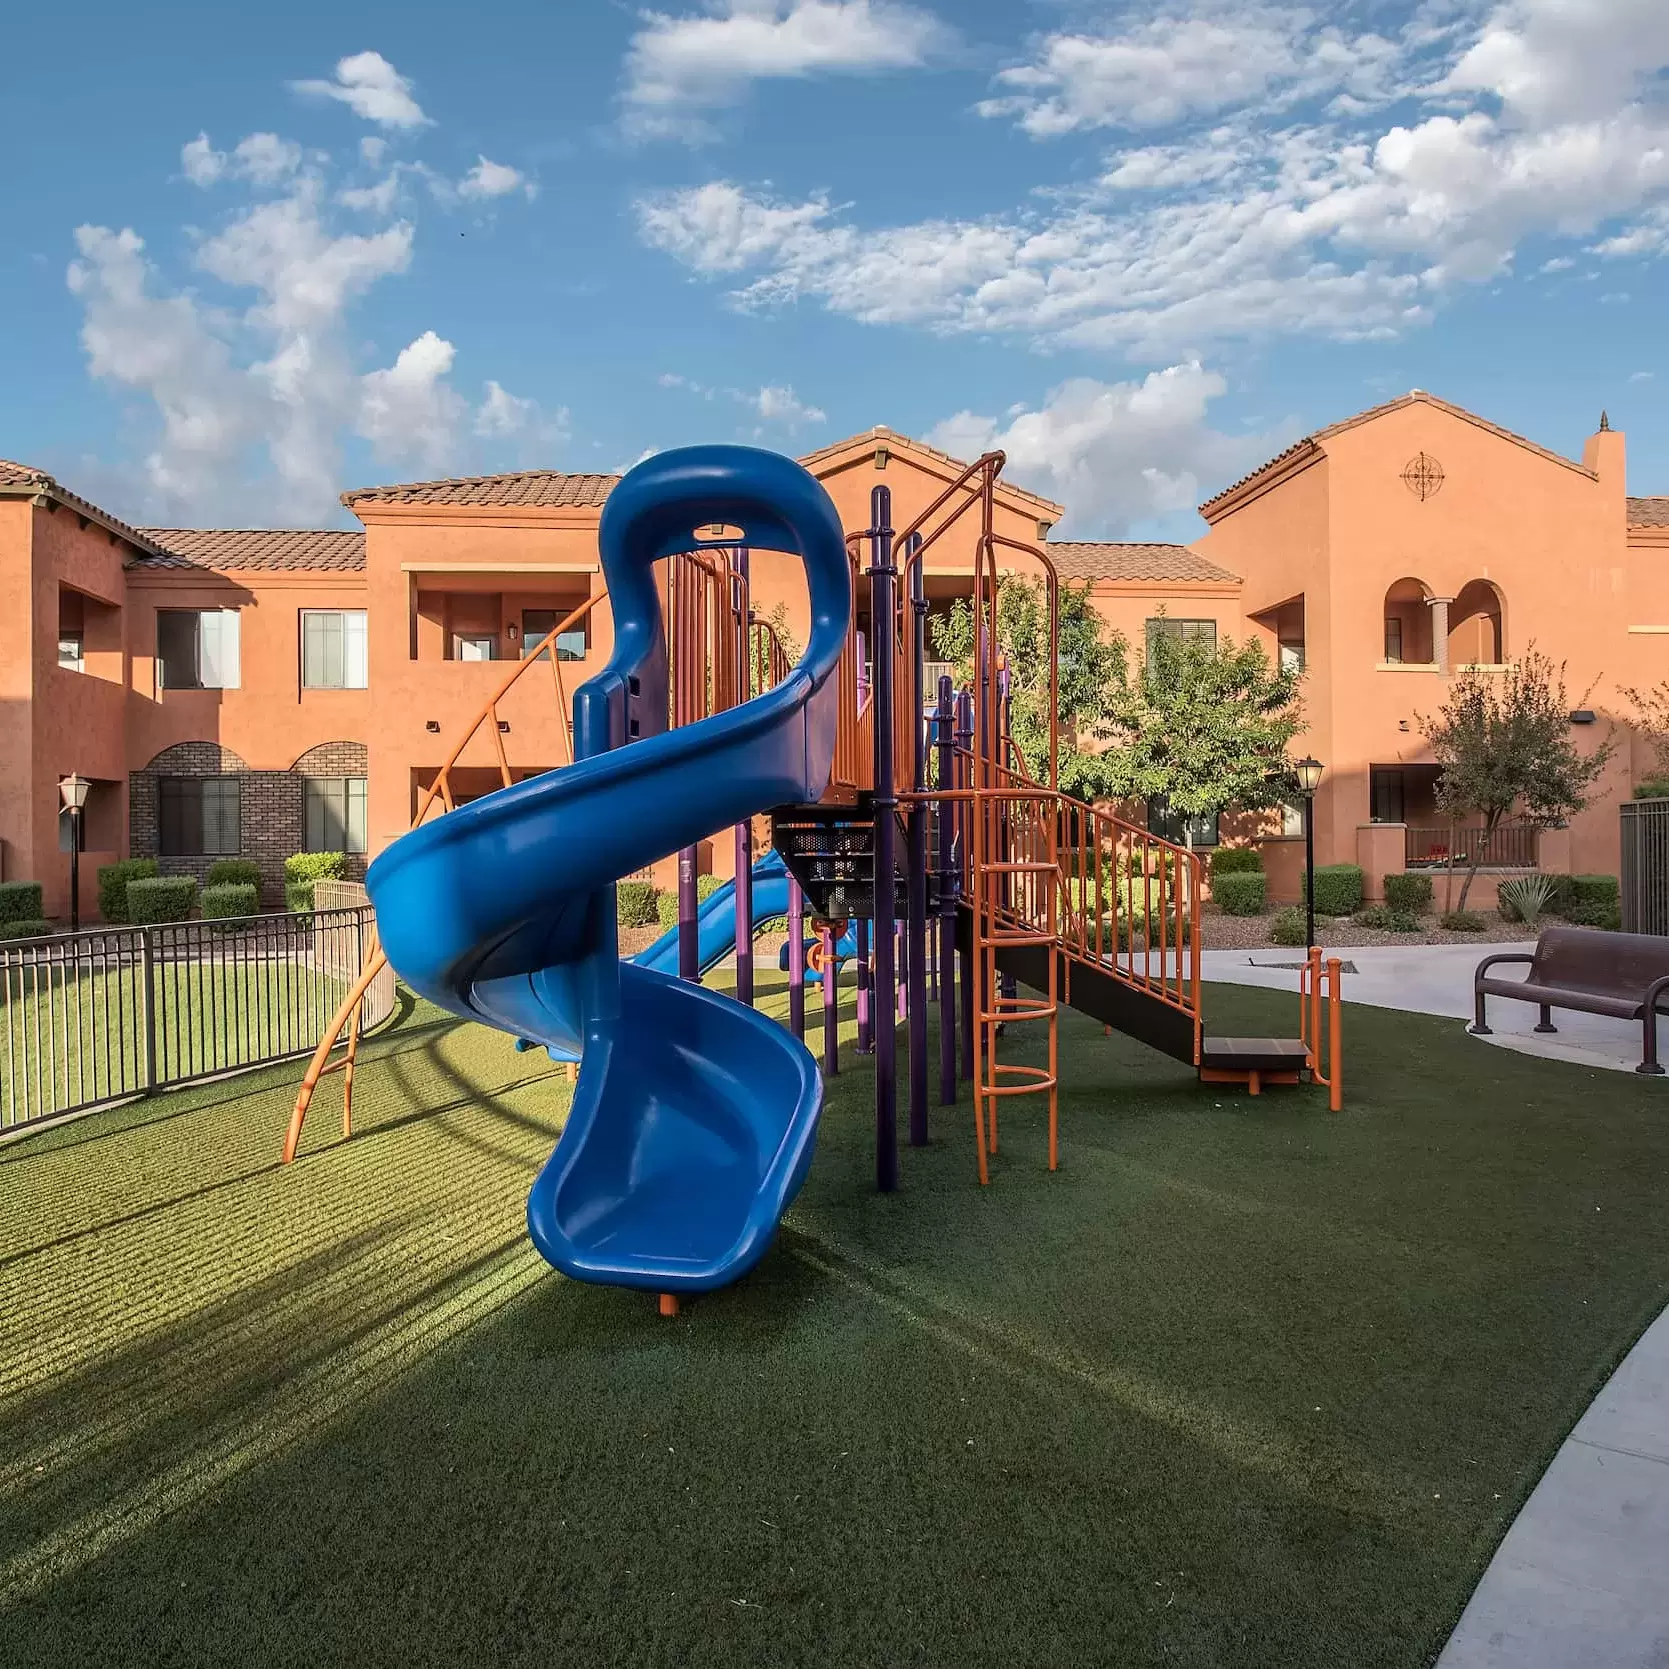 A playground with a slide for the children in the apartment community.